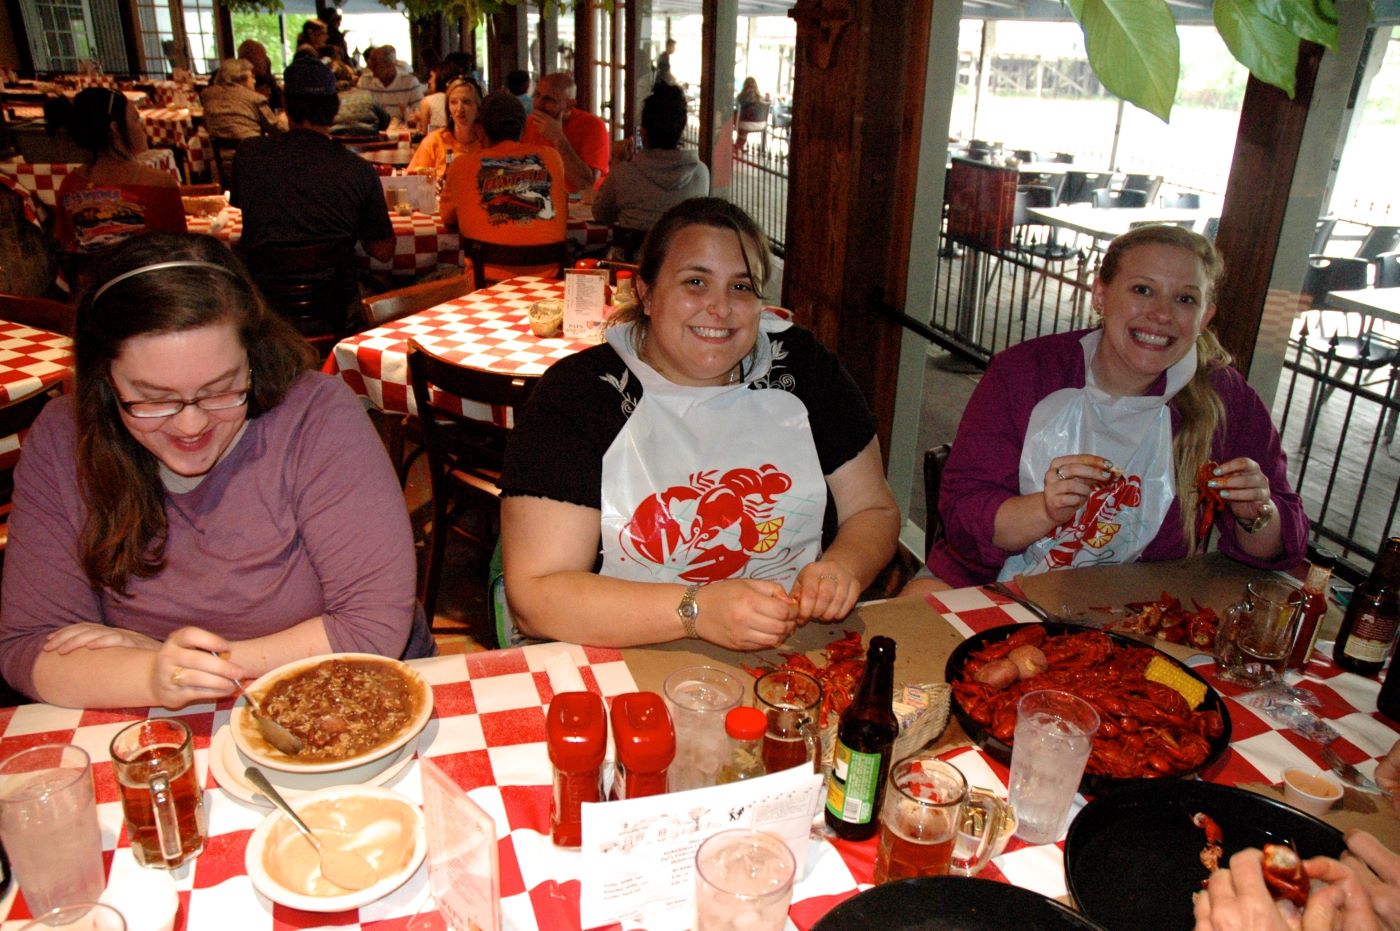 Julie, Danielle, and friends enjoing crawfish